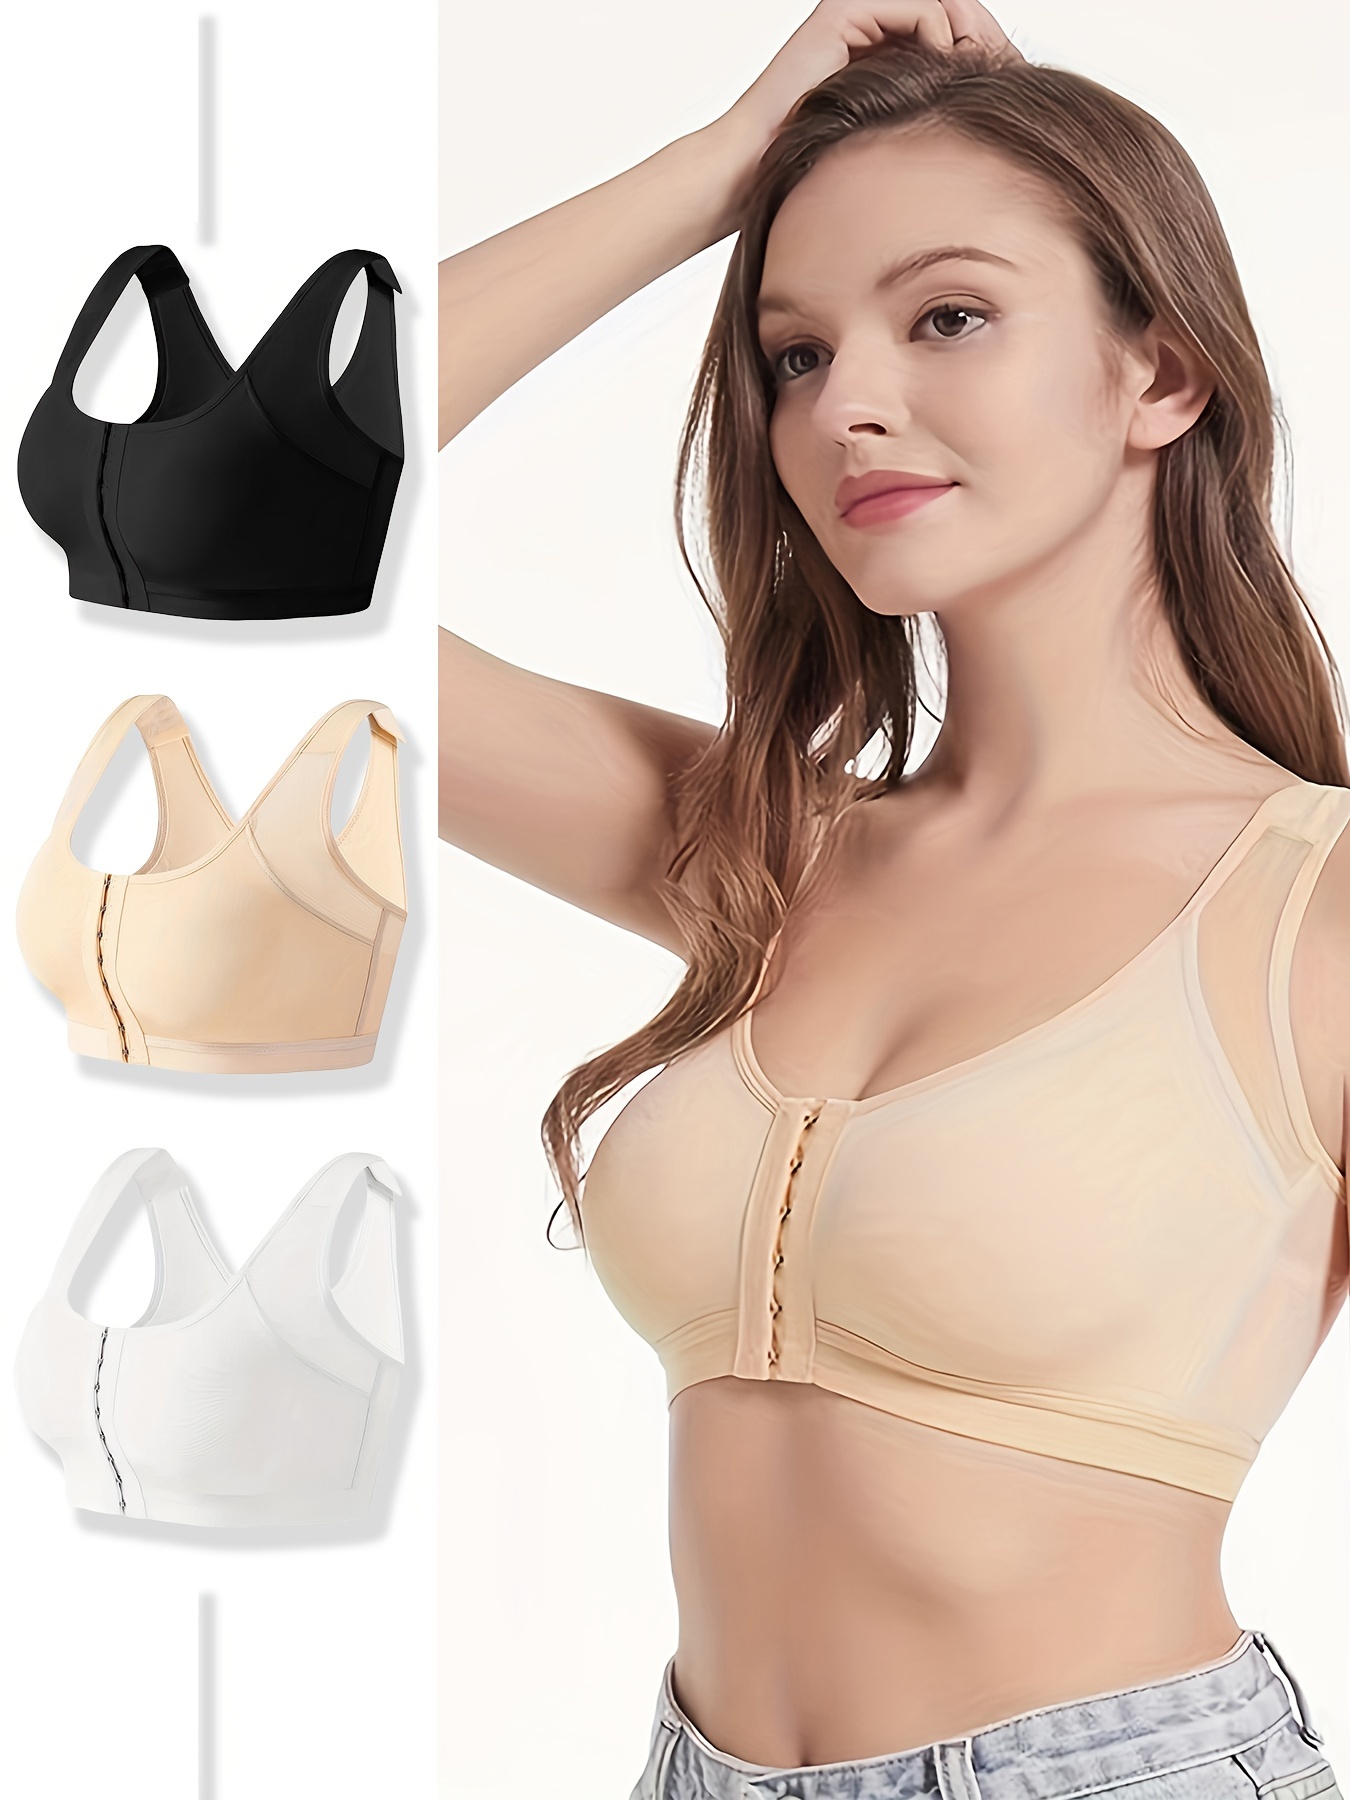 Boond Daily Comfort Wireless Shaper Bra,Adjustable Shoulder Strap  Breathable Liftup Sports Bras for Women,Posture Correction Support Bras.